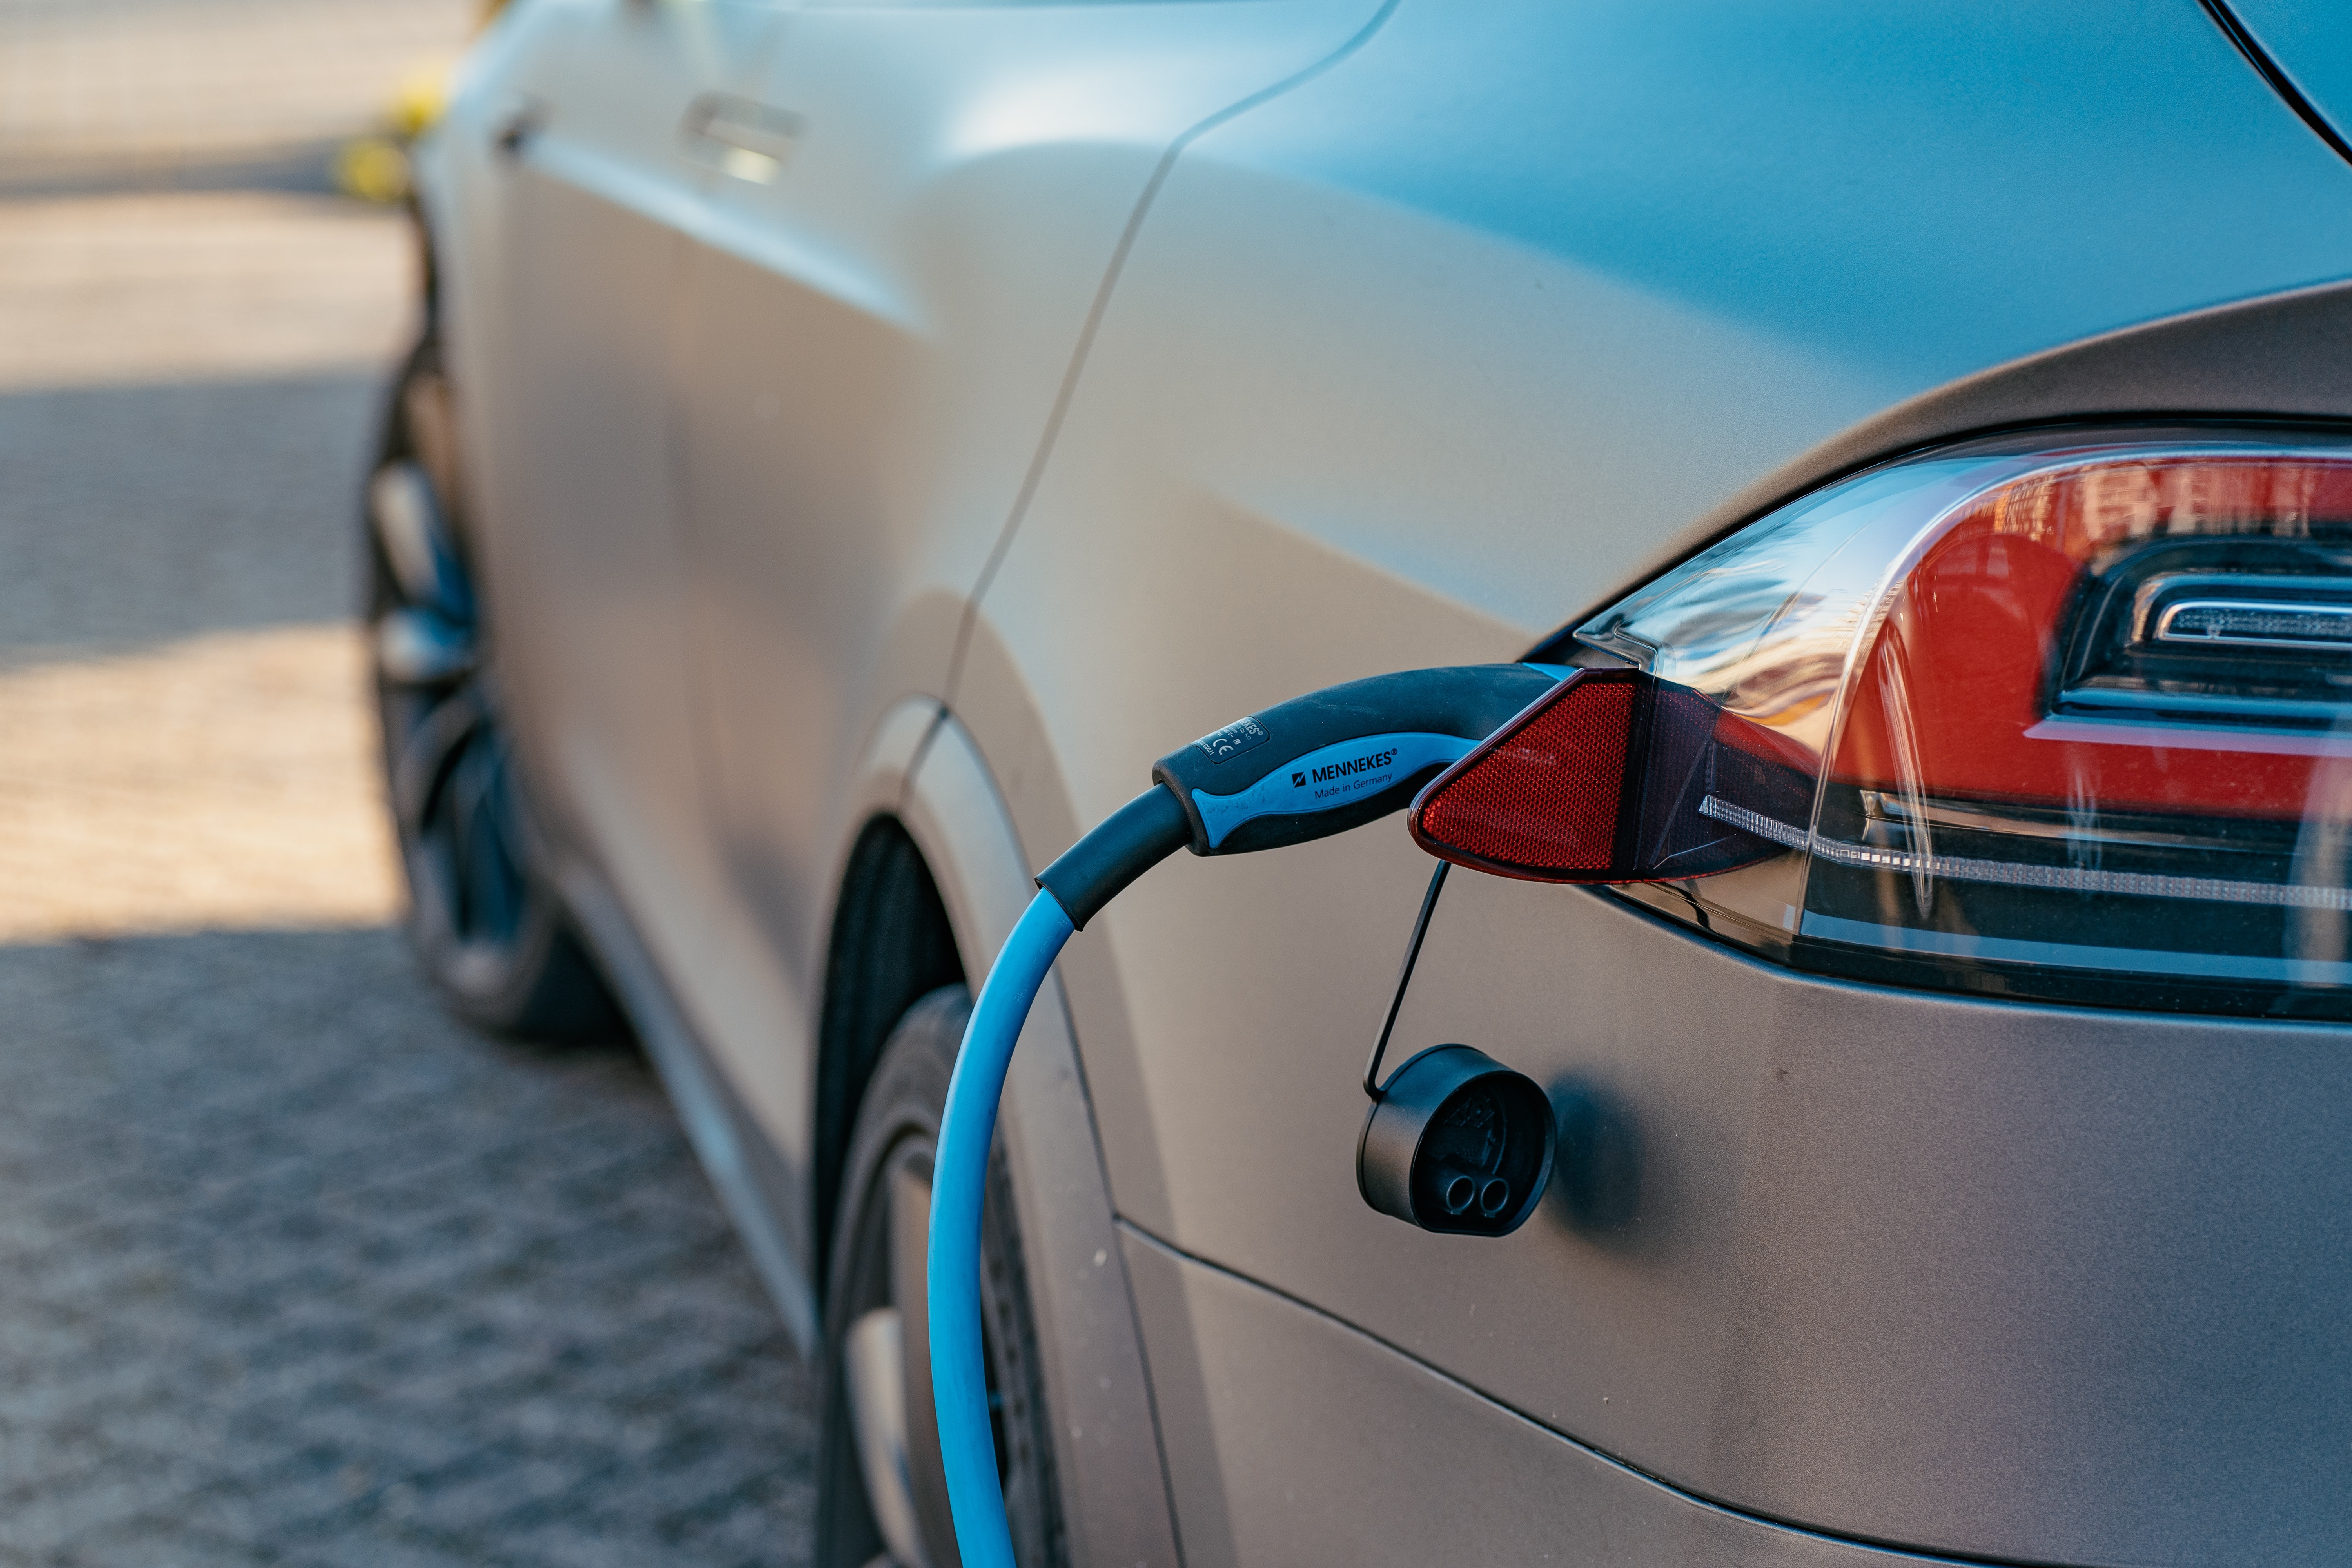 Electric vehicle charge points across Greater Manchester